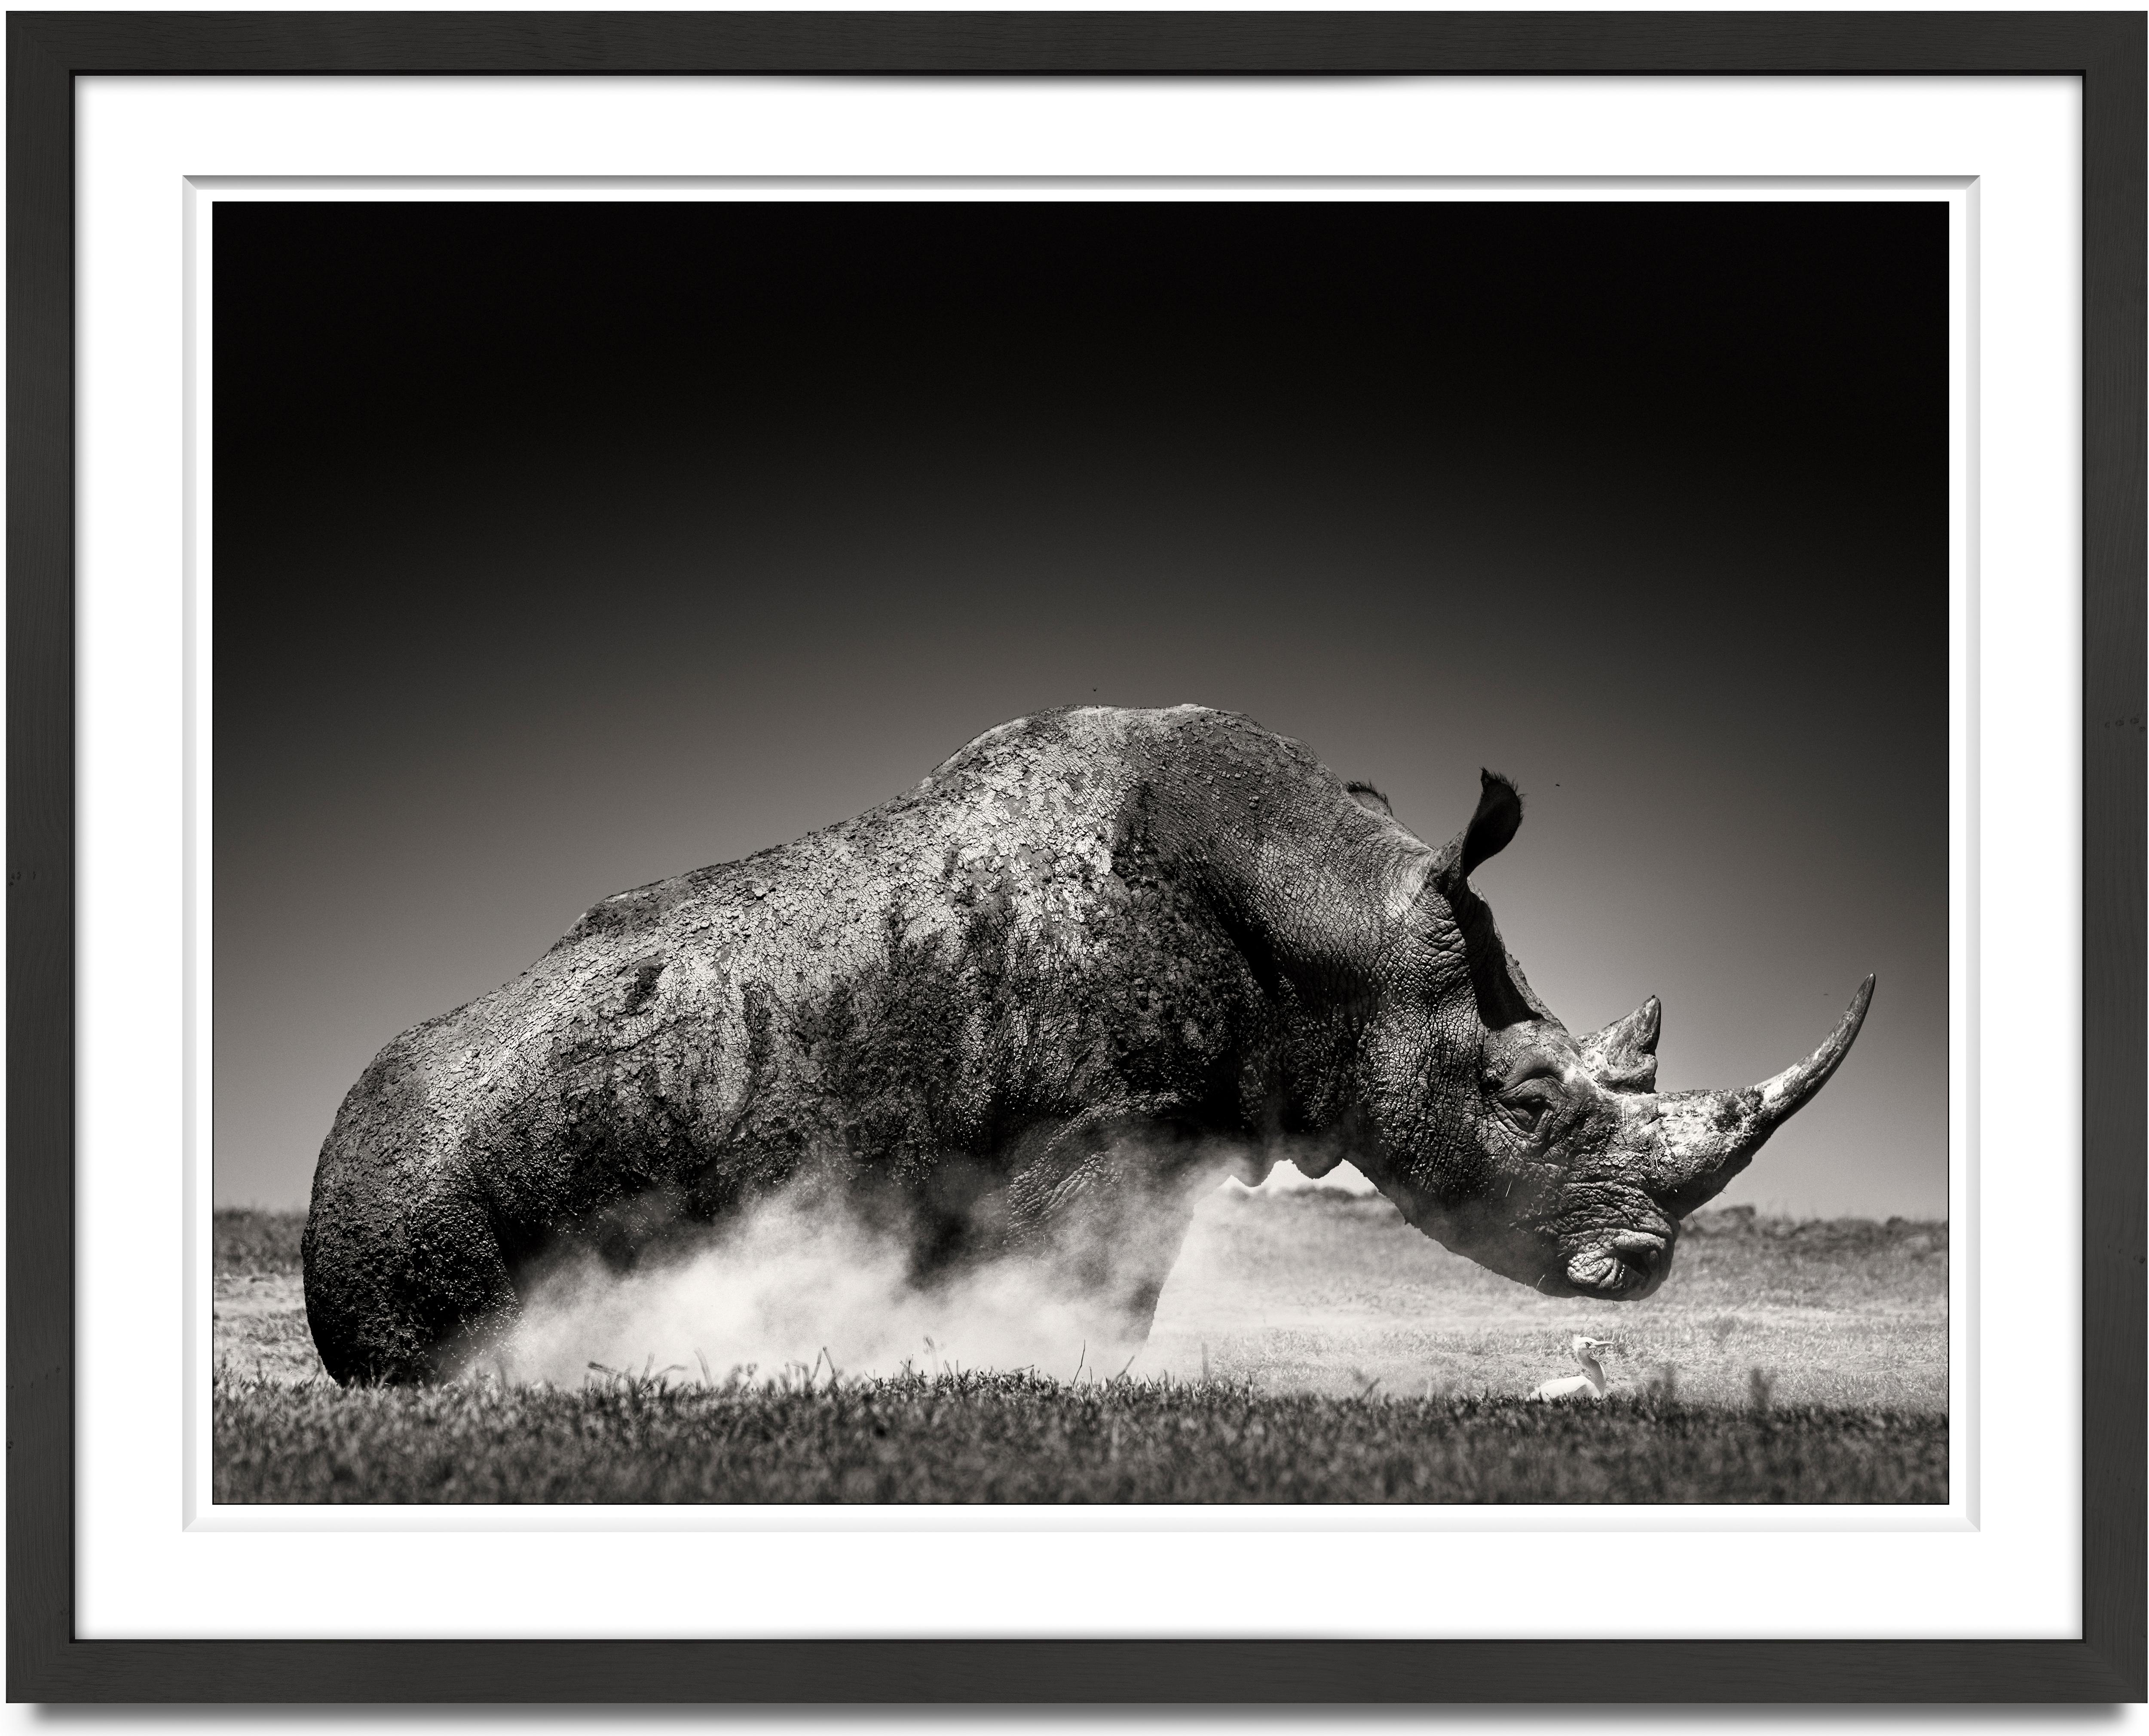 Rise I, animal, wildlife, black and white photography, rhino, africa - Photograph by Joachim Schmeisser